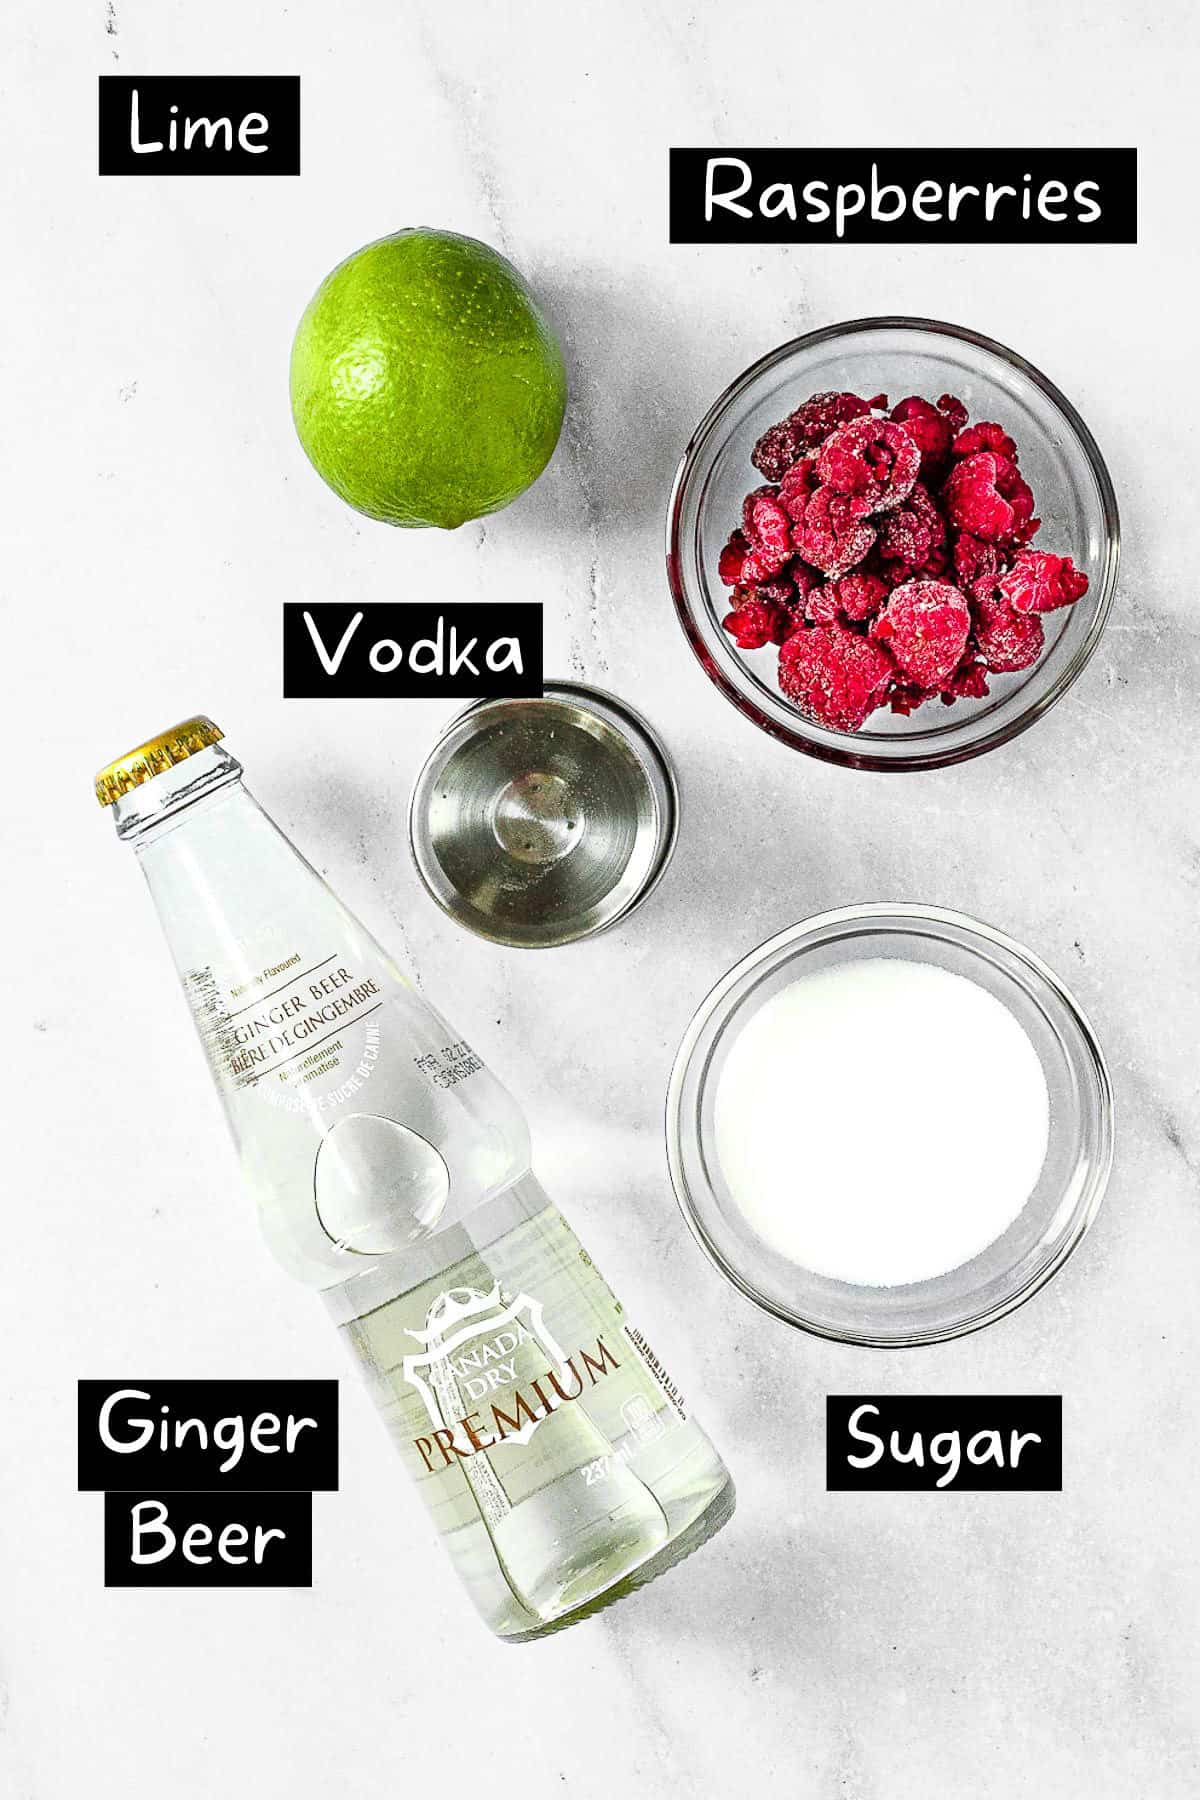 The ingredients needed to make the moscow mule.